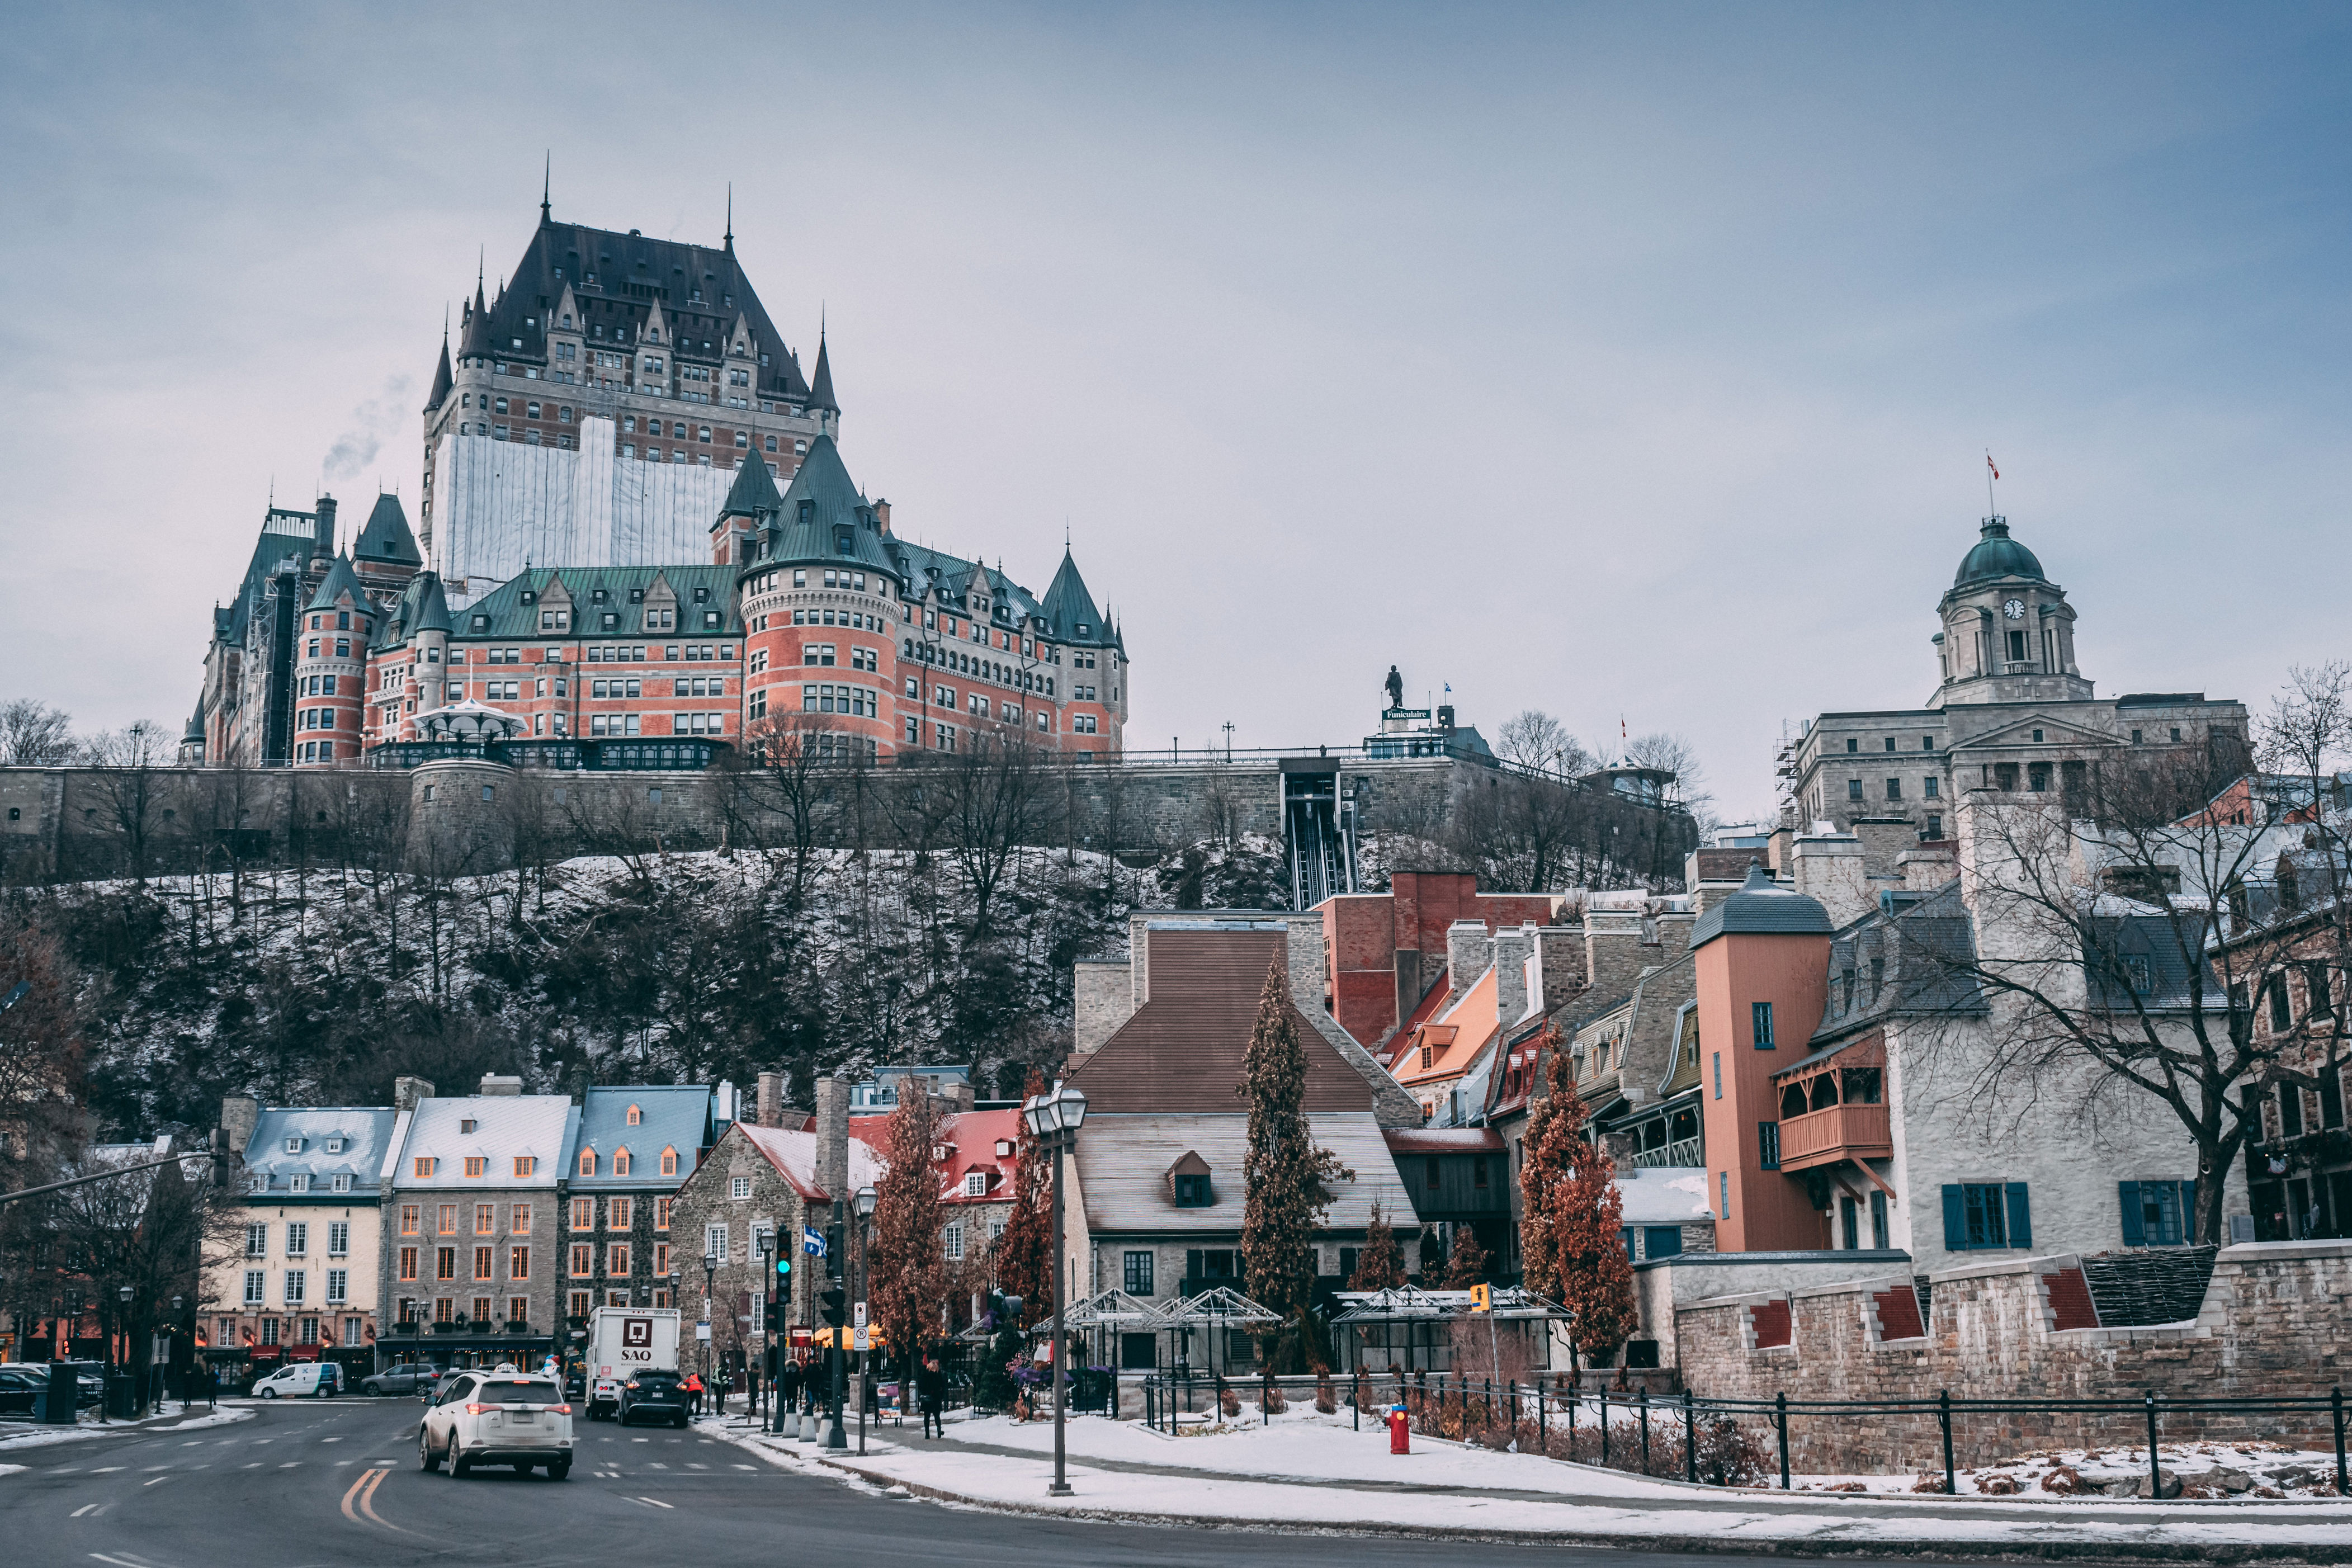 <p>Quebec City is located in Canada but boasts a charming European architecture complete with cobblestone streets and a rich history. The UNESCO-listed Old Town gives off a warm old-world charm.</p><p><strong>Highlights:</strong> Chateau Frontenac, Quebec Winter Festival</p><p><strong>Activities to Enjoy:</strong> French-Canadian culture, cuisine, shopping, photography</p>